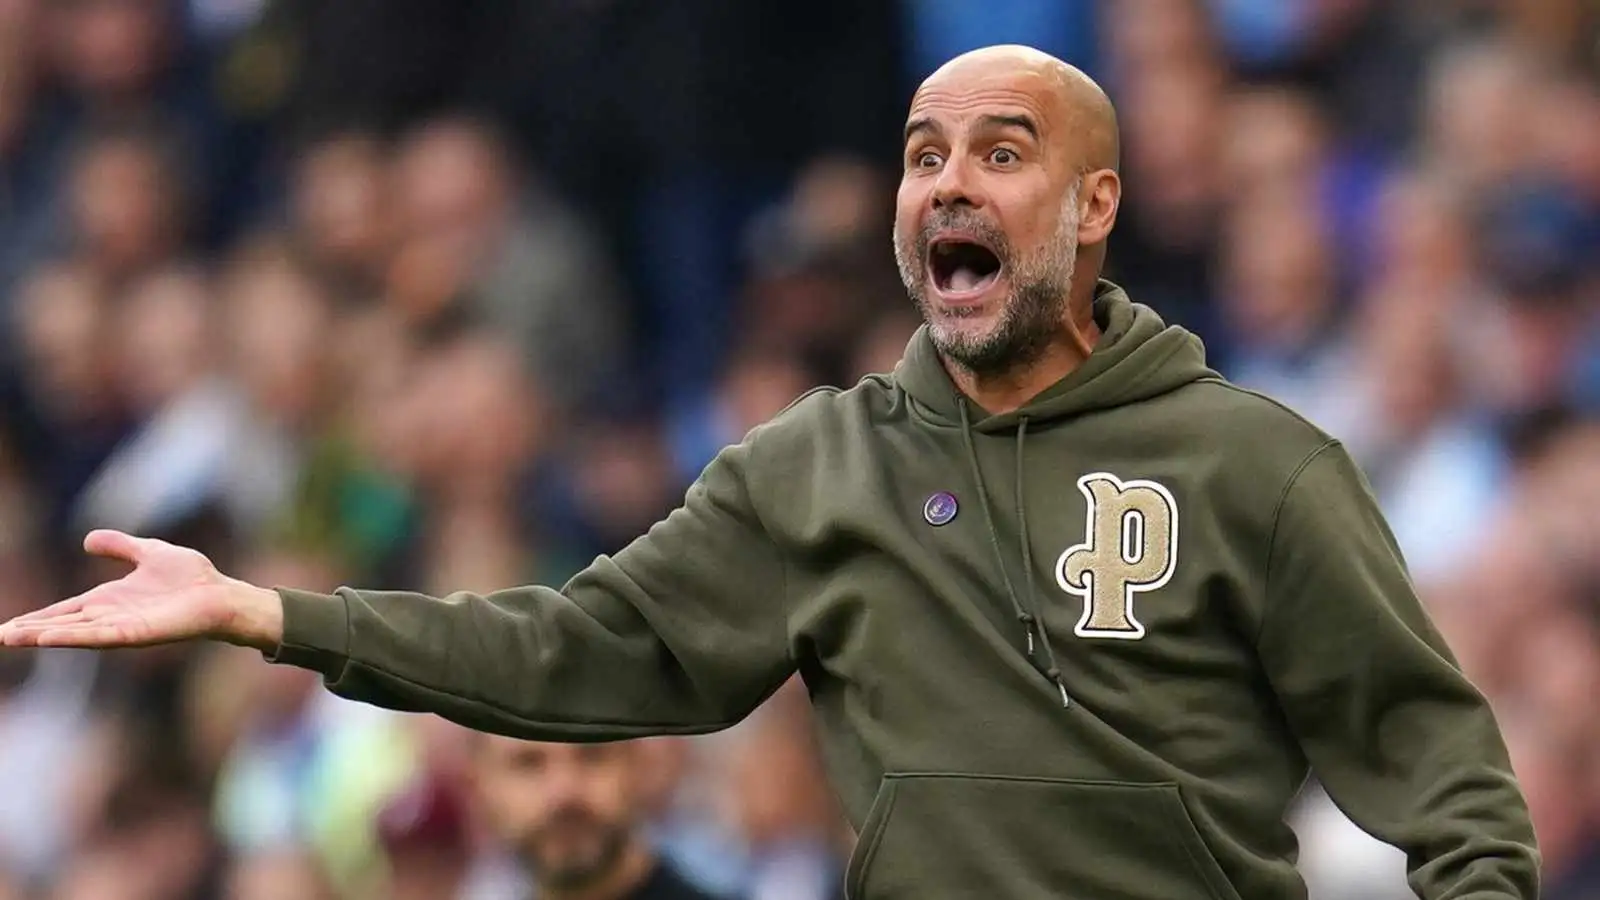 Pep Guardiola during a Manchester City match